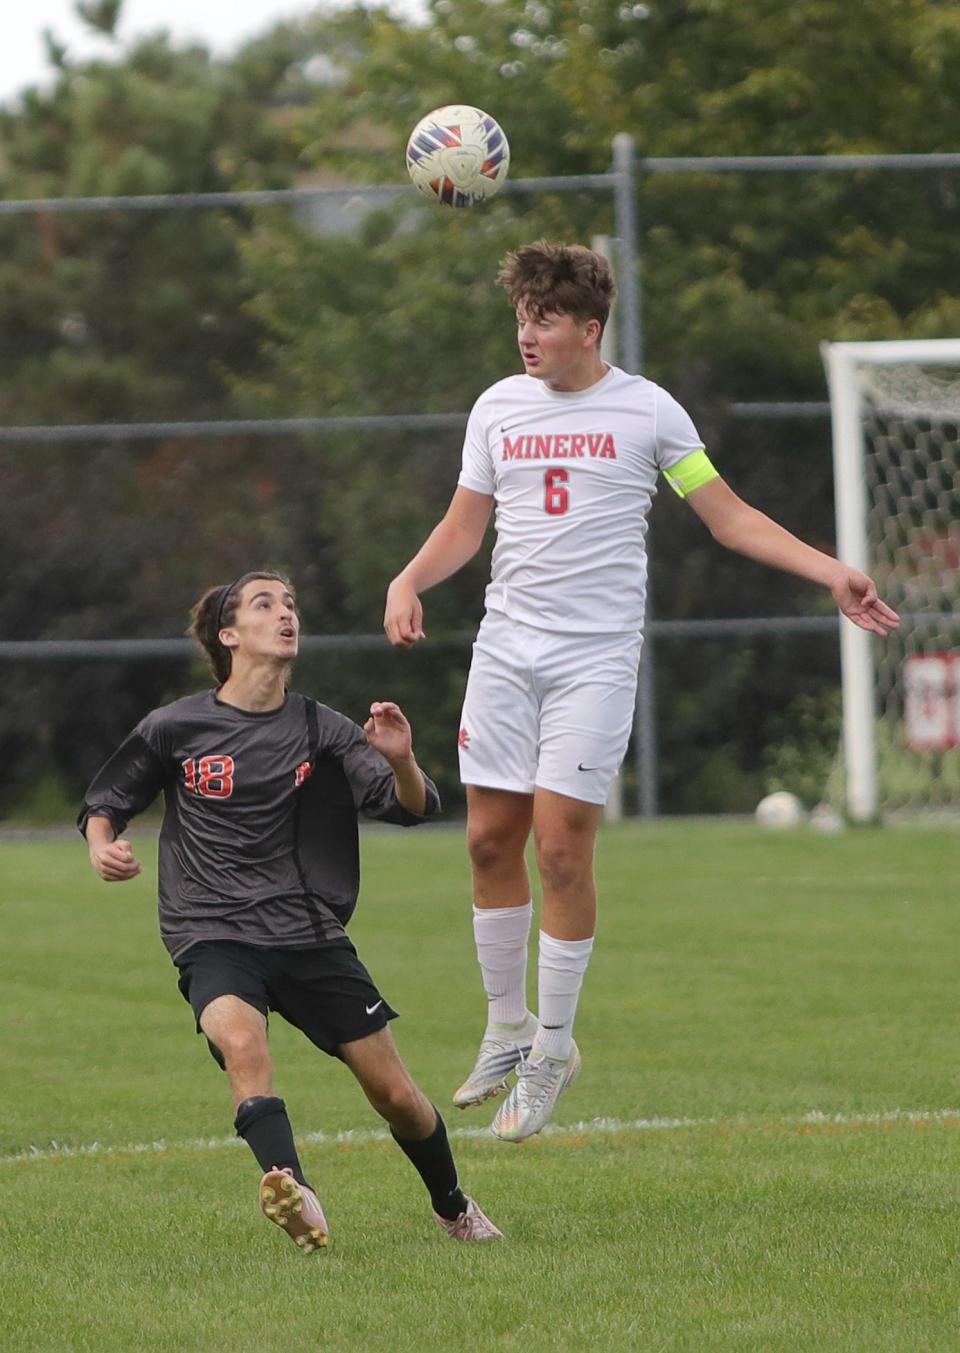 Minerva's Nathanial Frankford leaps for the ball during a game against Marlington this season.